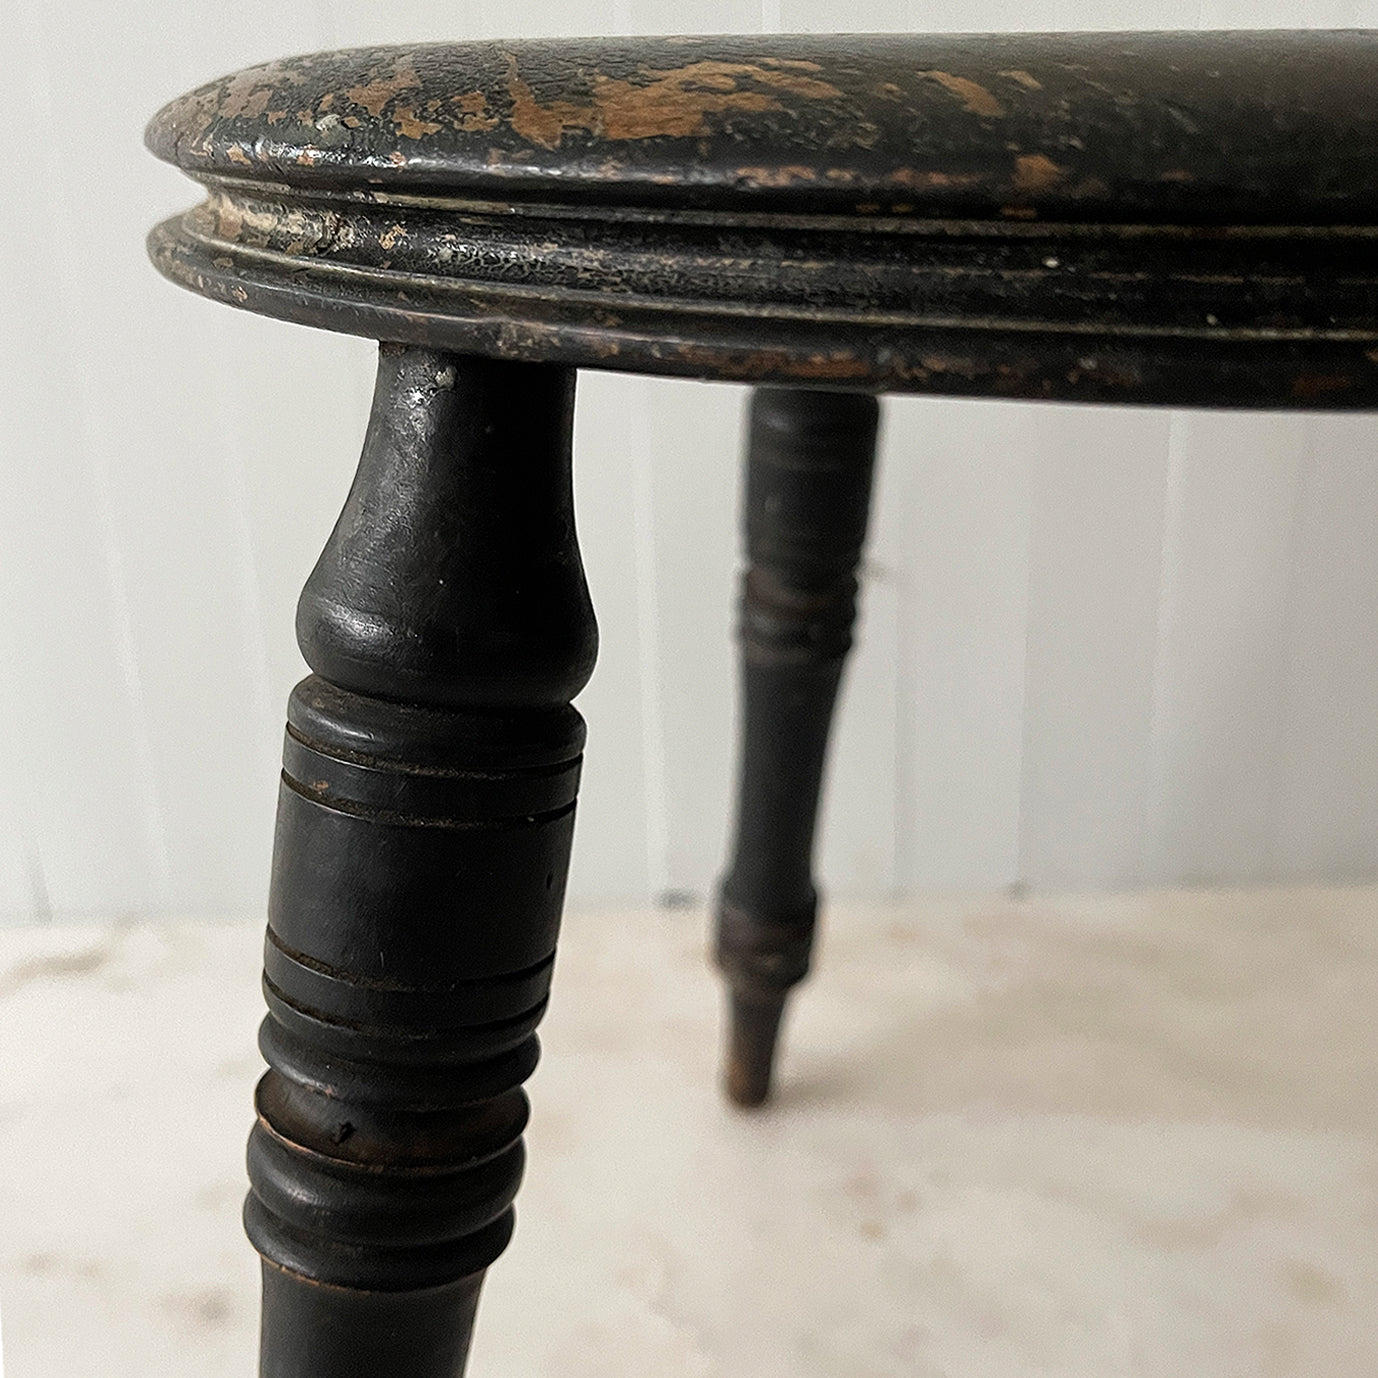 A Victorian Ebonised Milking Stool with the most perfect ware to its surface. It has three finely turned legs and a beautiful profile to the seats edge. Nice and stable too - SHOP NOW - www.intovintage.co.uk